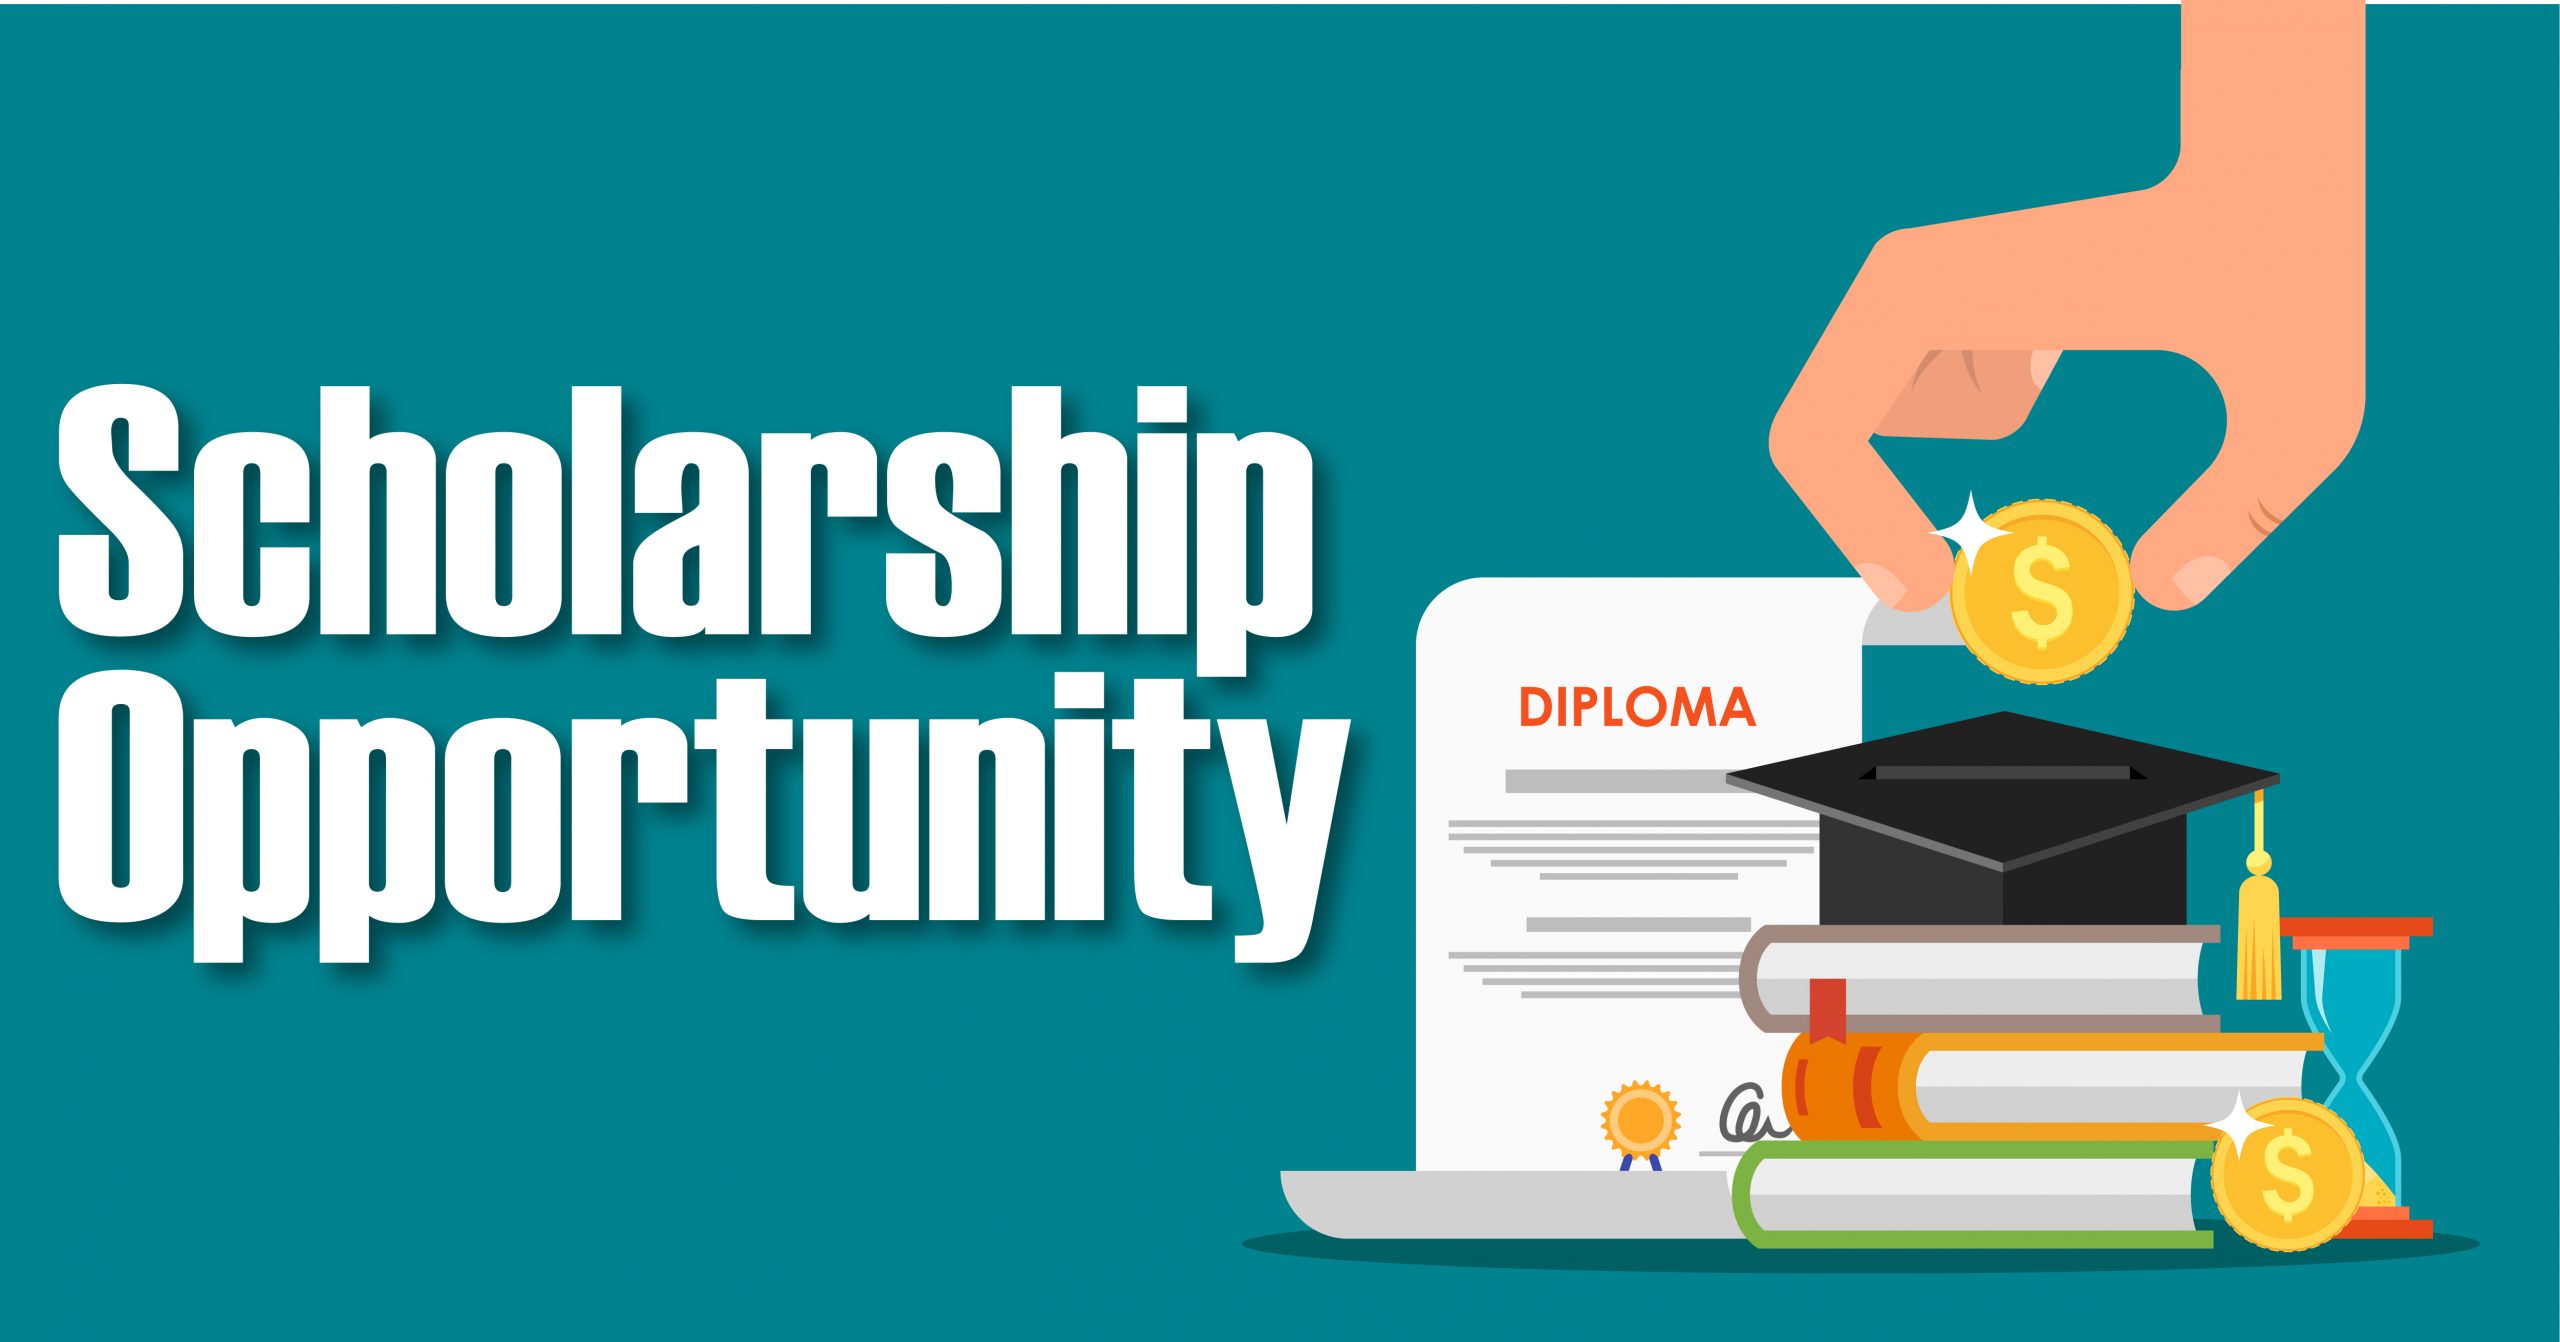 14 Best Scholarships 2021/2022 See Application List